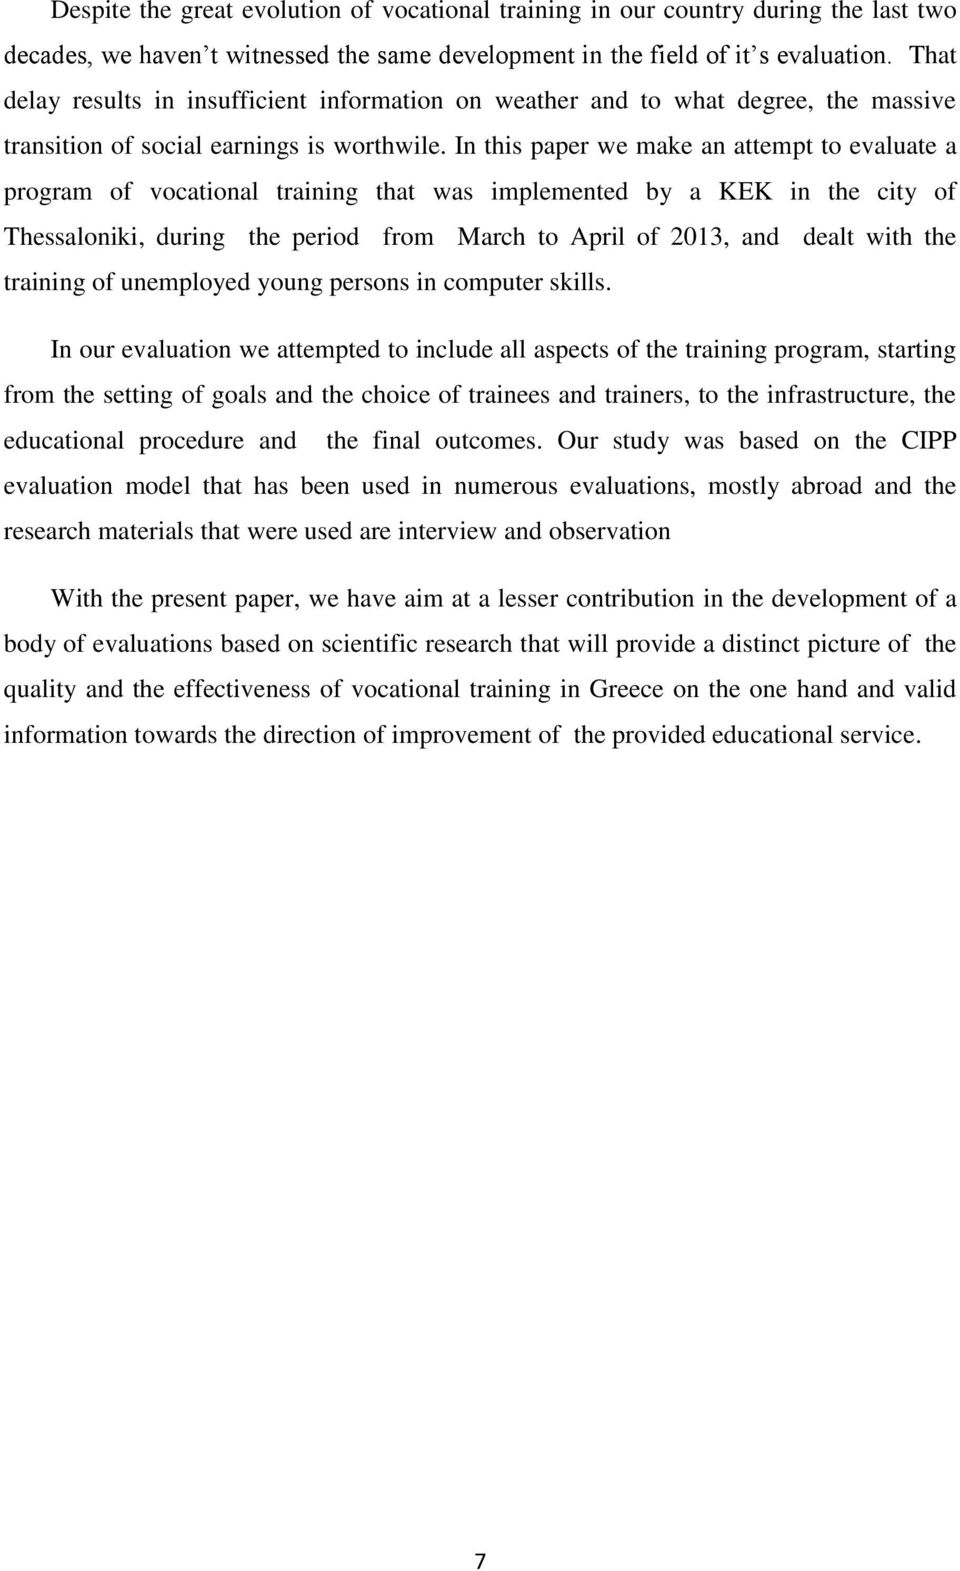 In this paper we make an attempt to evaluate a program of vocational training that was implemented by a KEK in the city of Thessaloniki, during the period from March to April of 2013, and dealt with